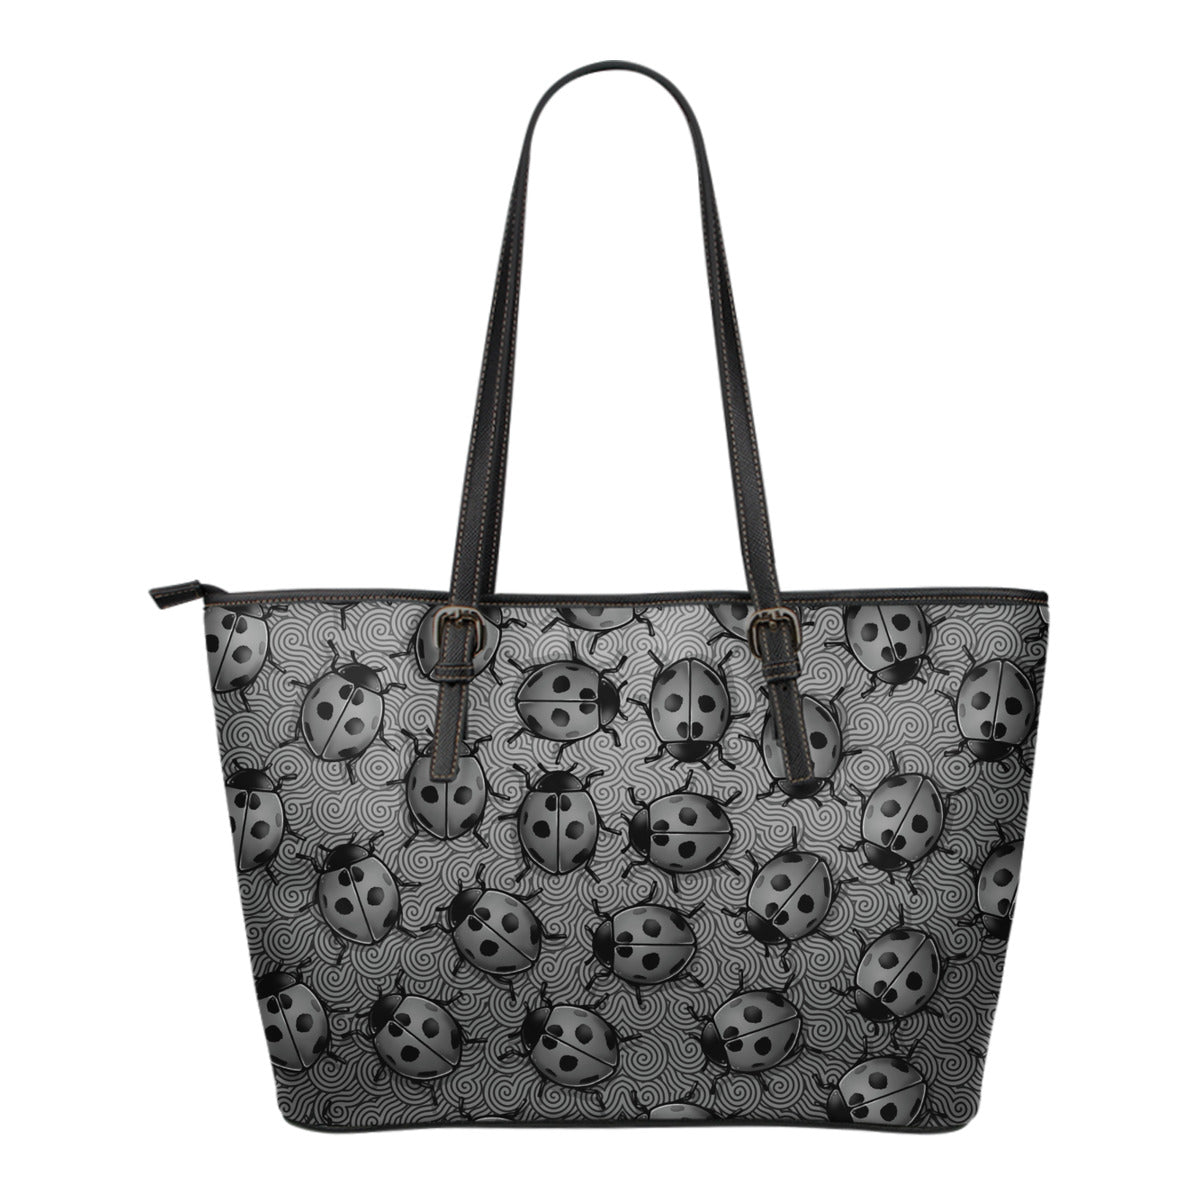 Lady Bug Swirl Small Leather Tote Bag - Gray